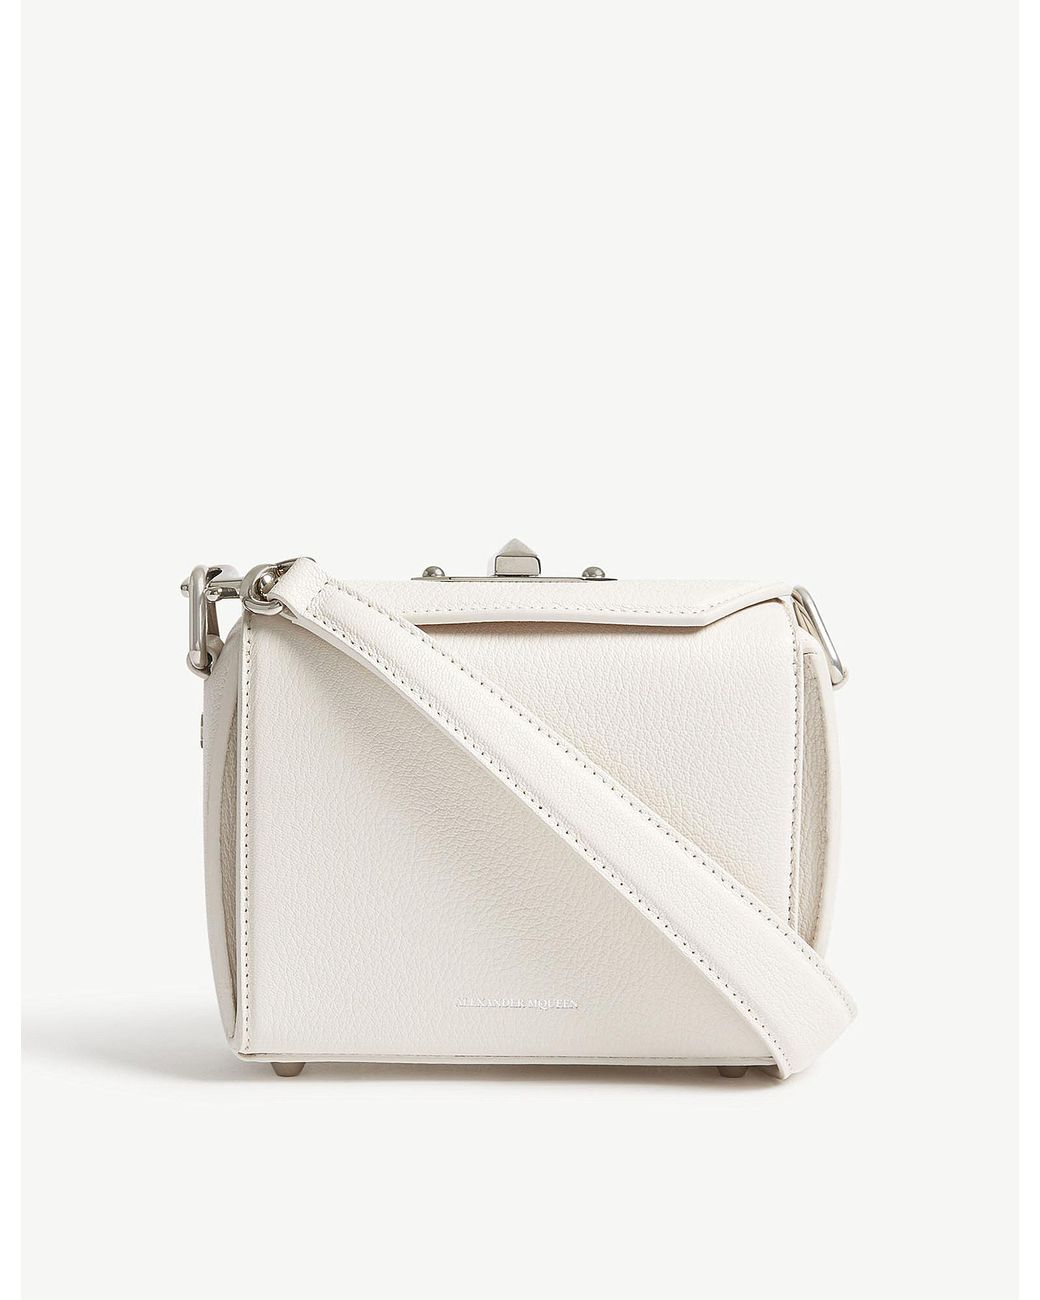 Alexander McQueen Box Bag in Off White with Gold Hardware